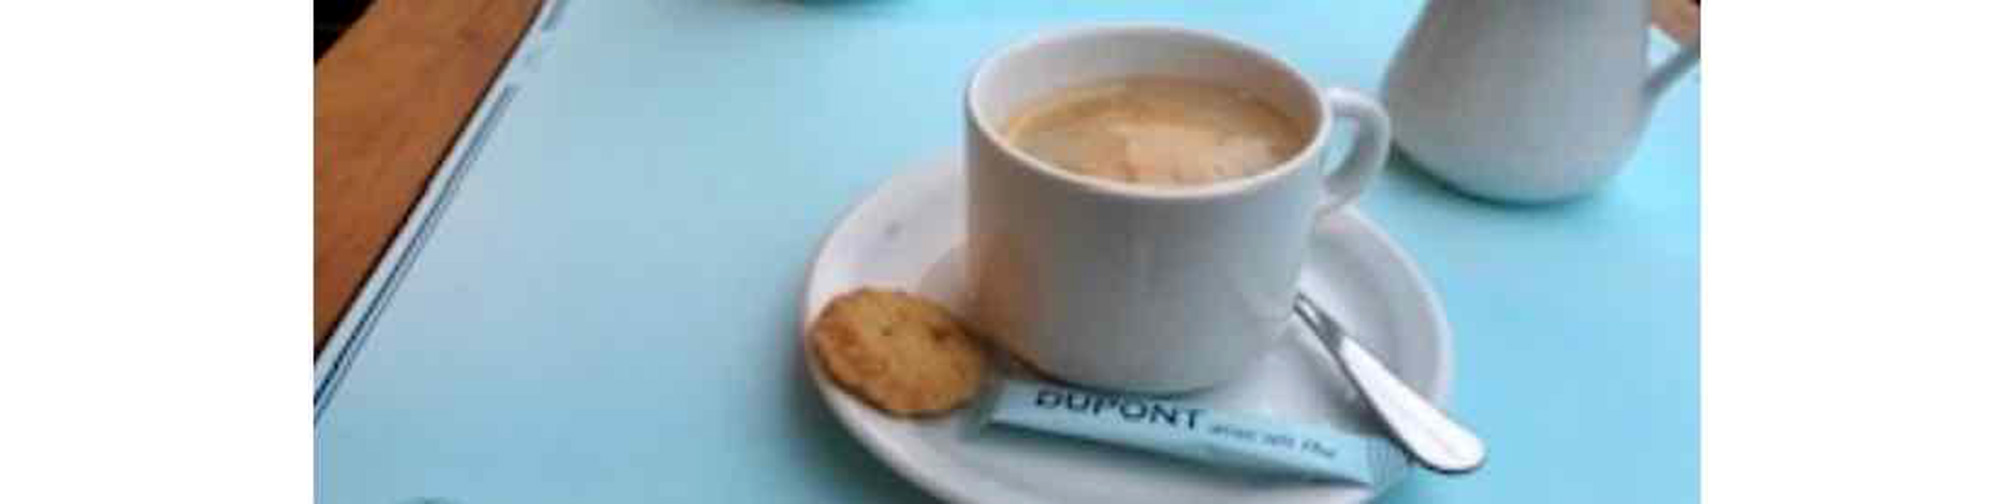 cup  of coffee with small biscuit and spoon on saucer